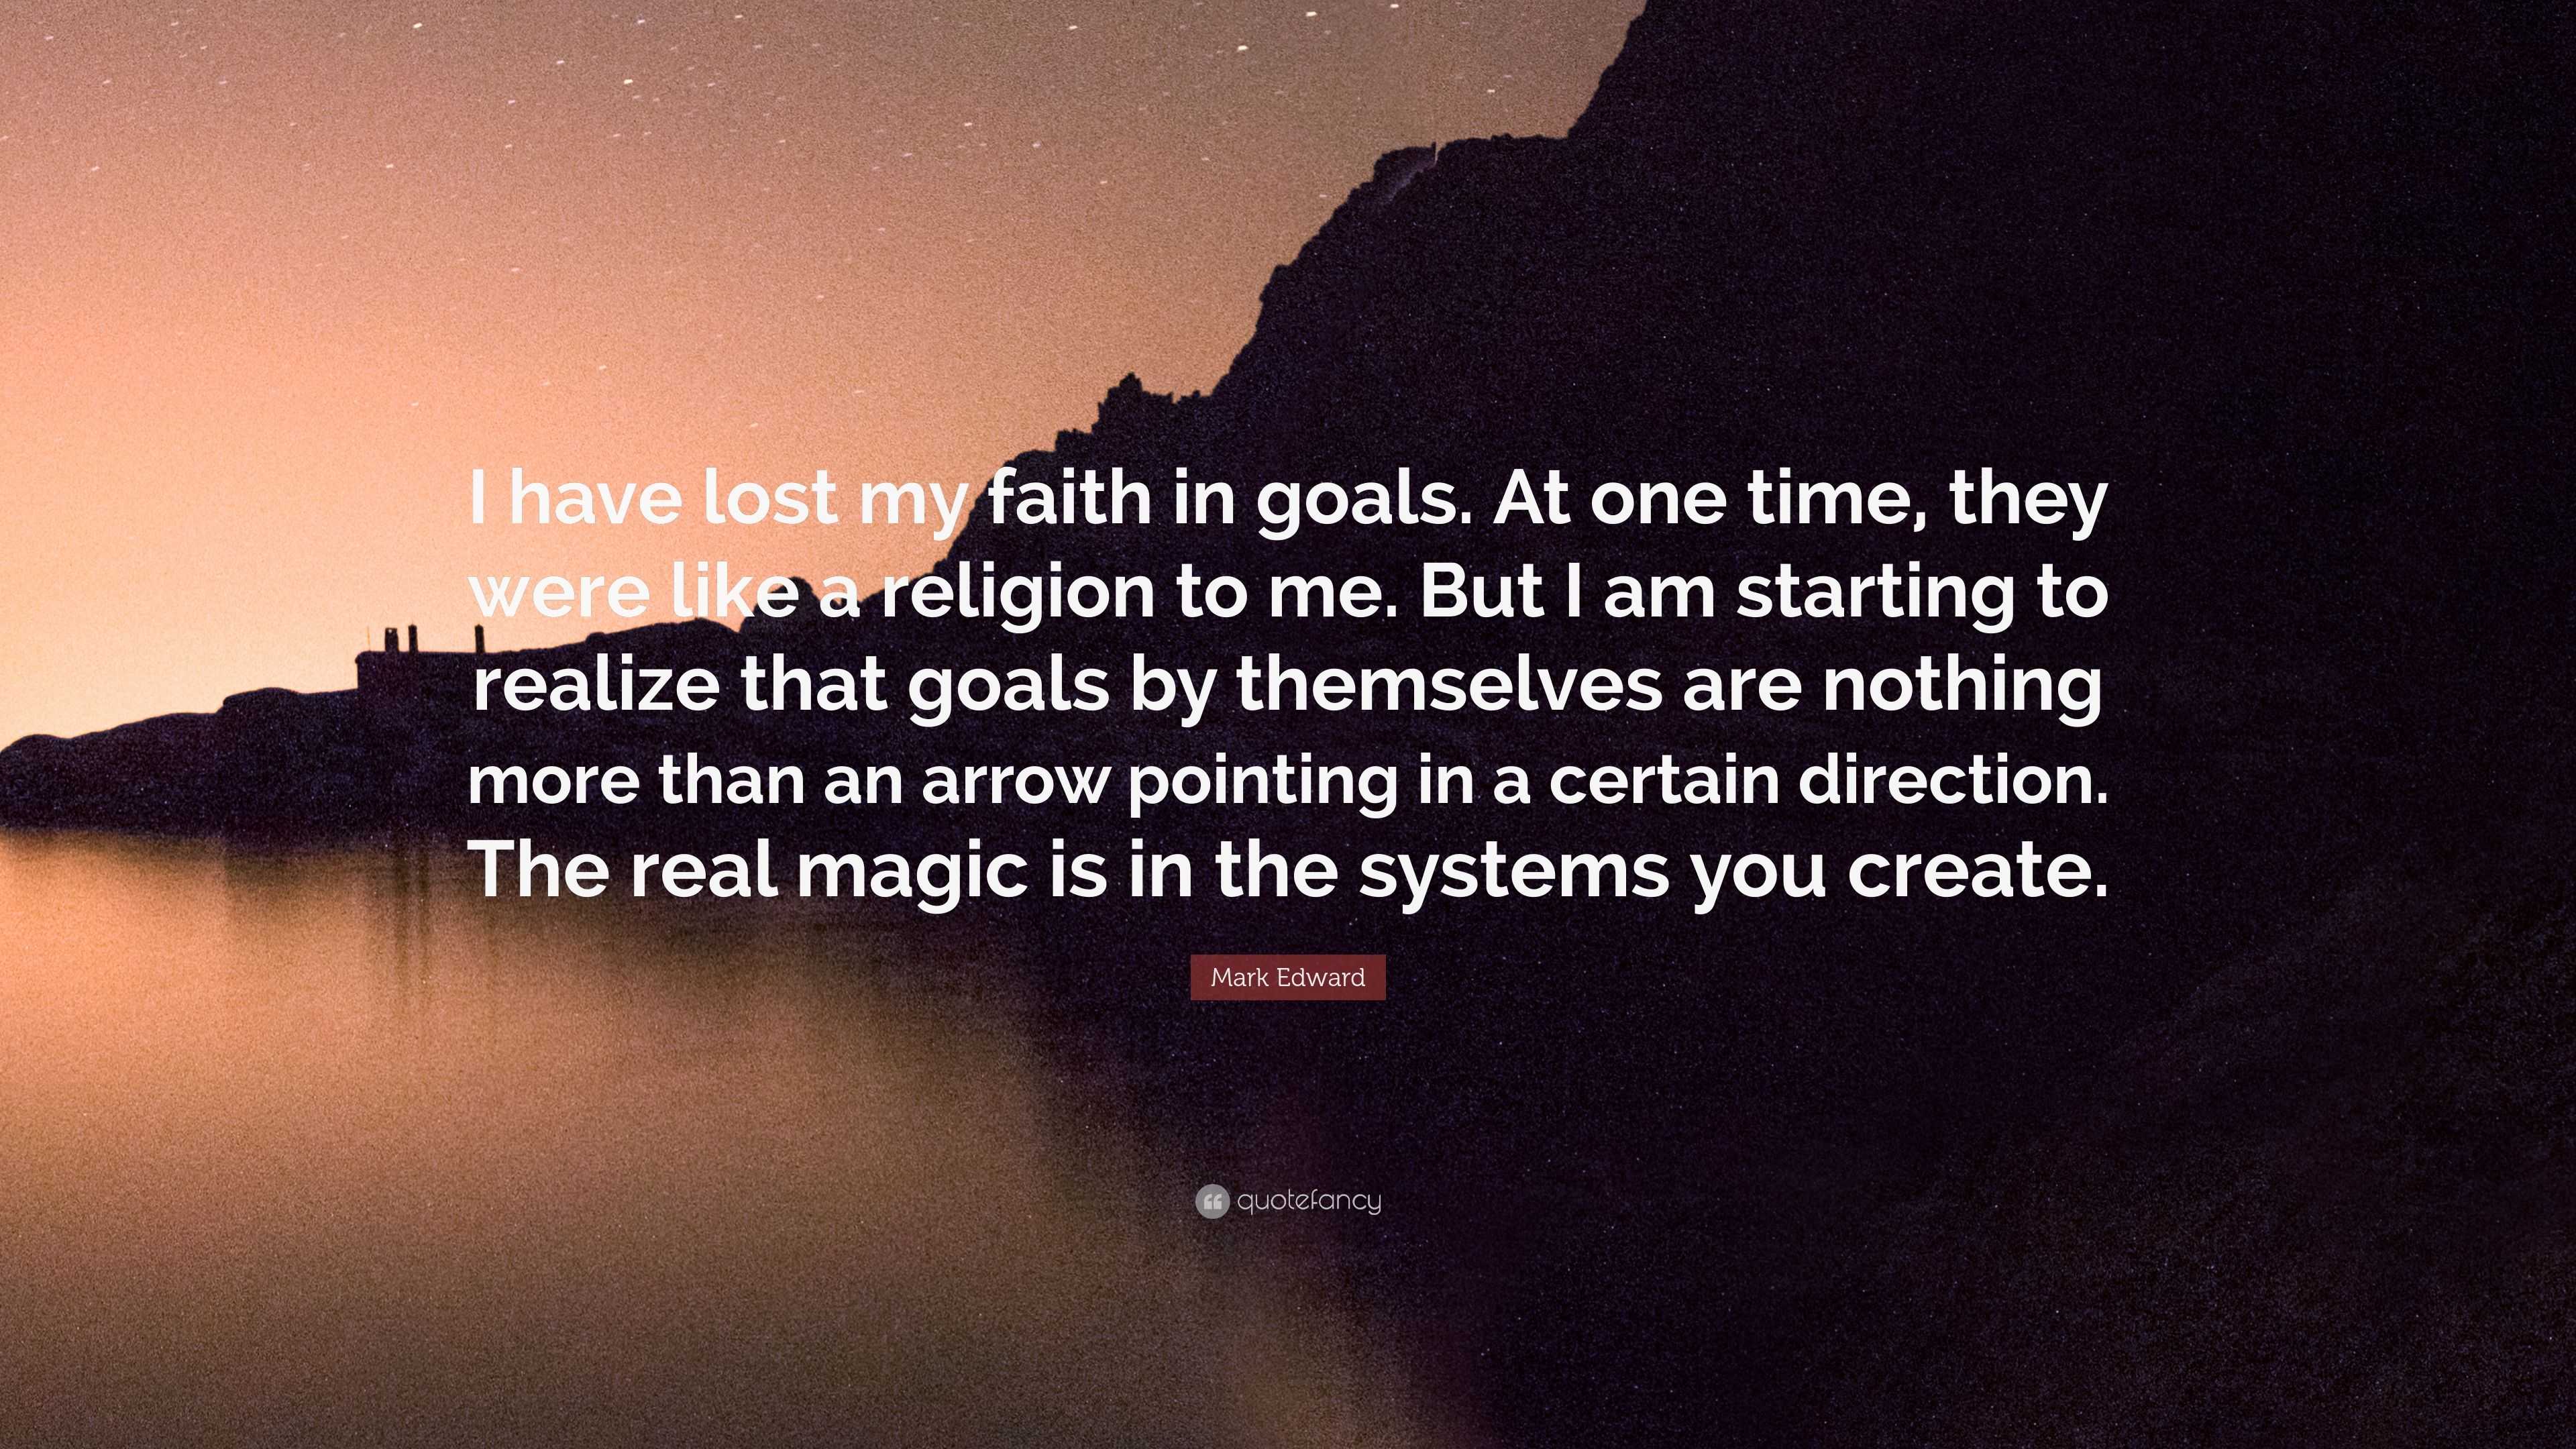 Mark Edward Quote “I have lost my faith in goals At one time